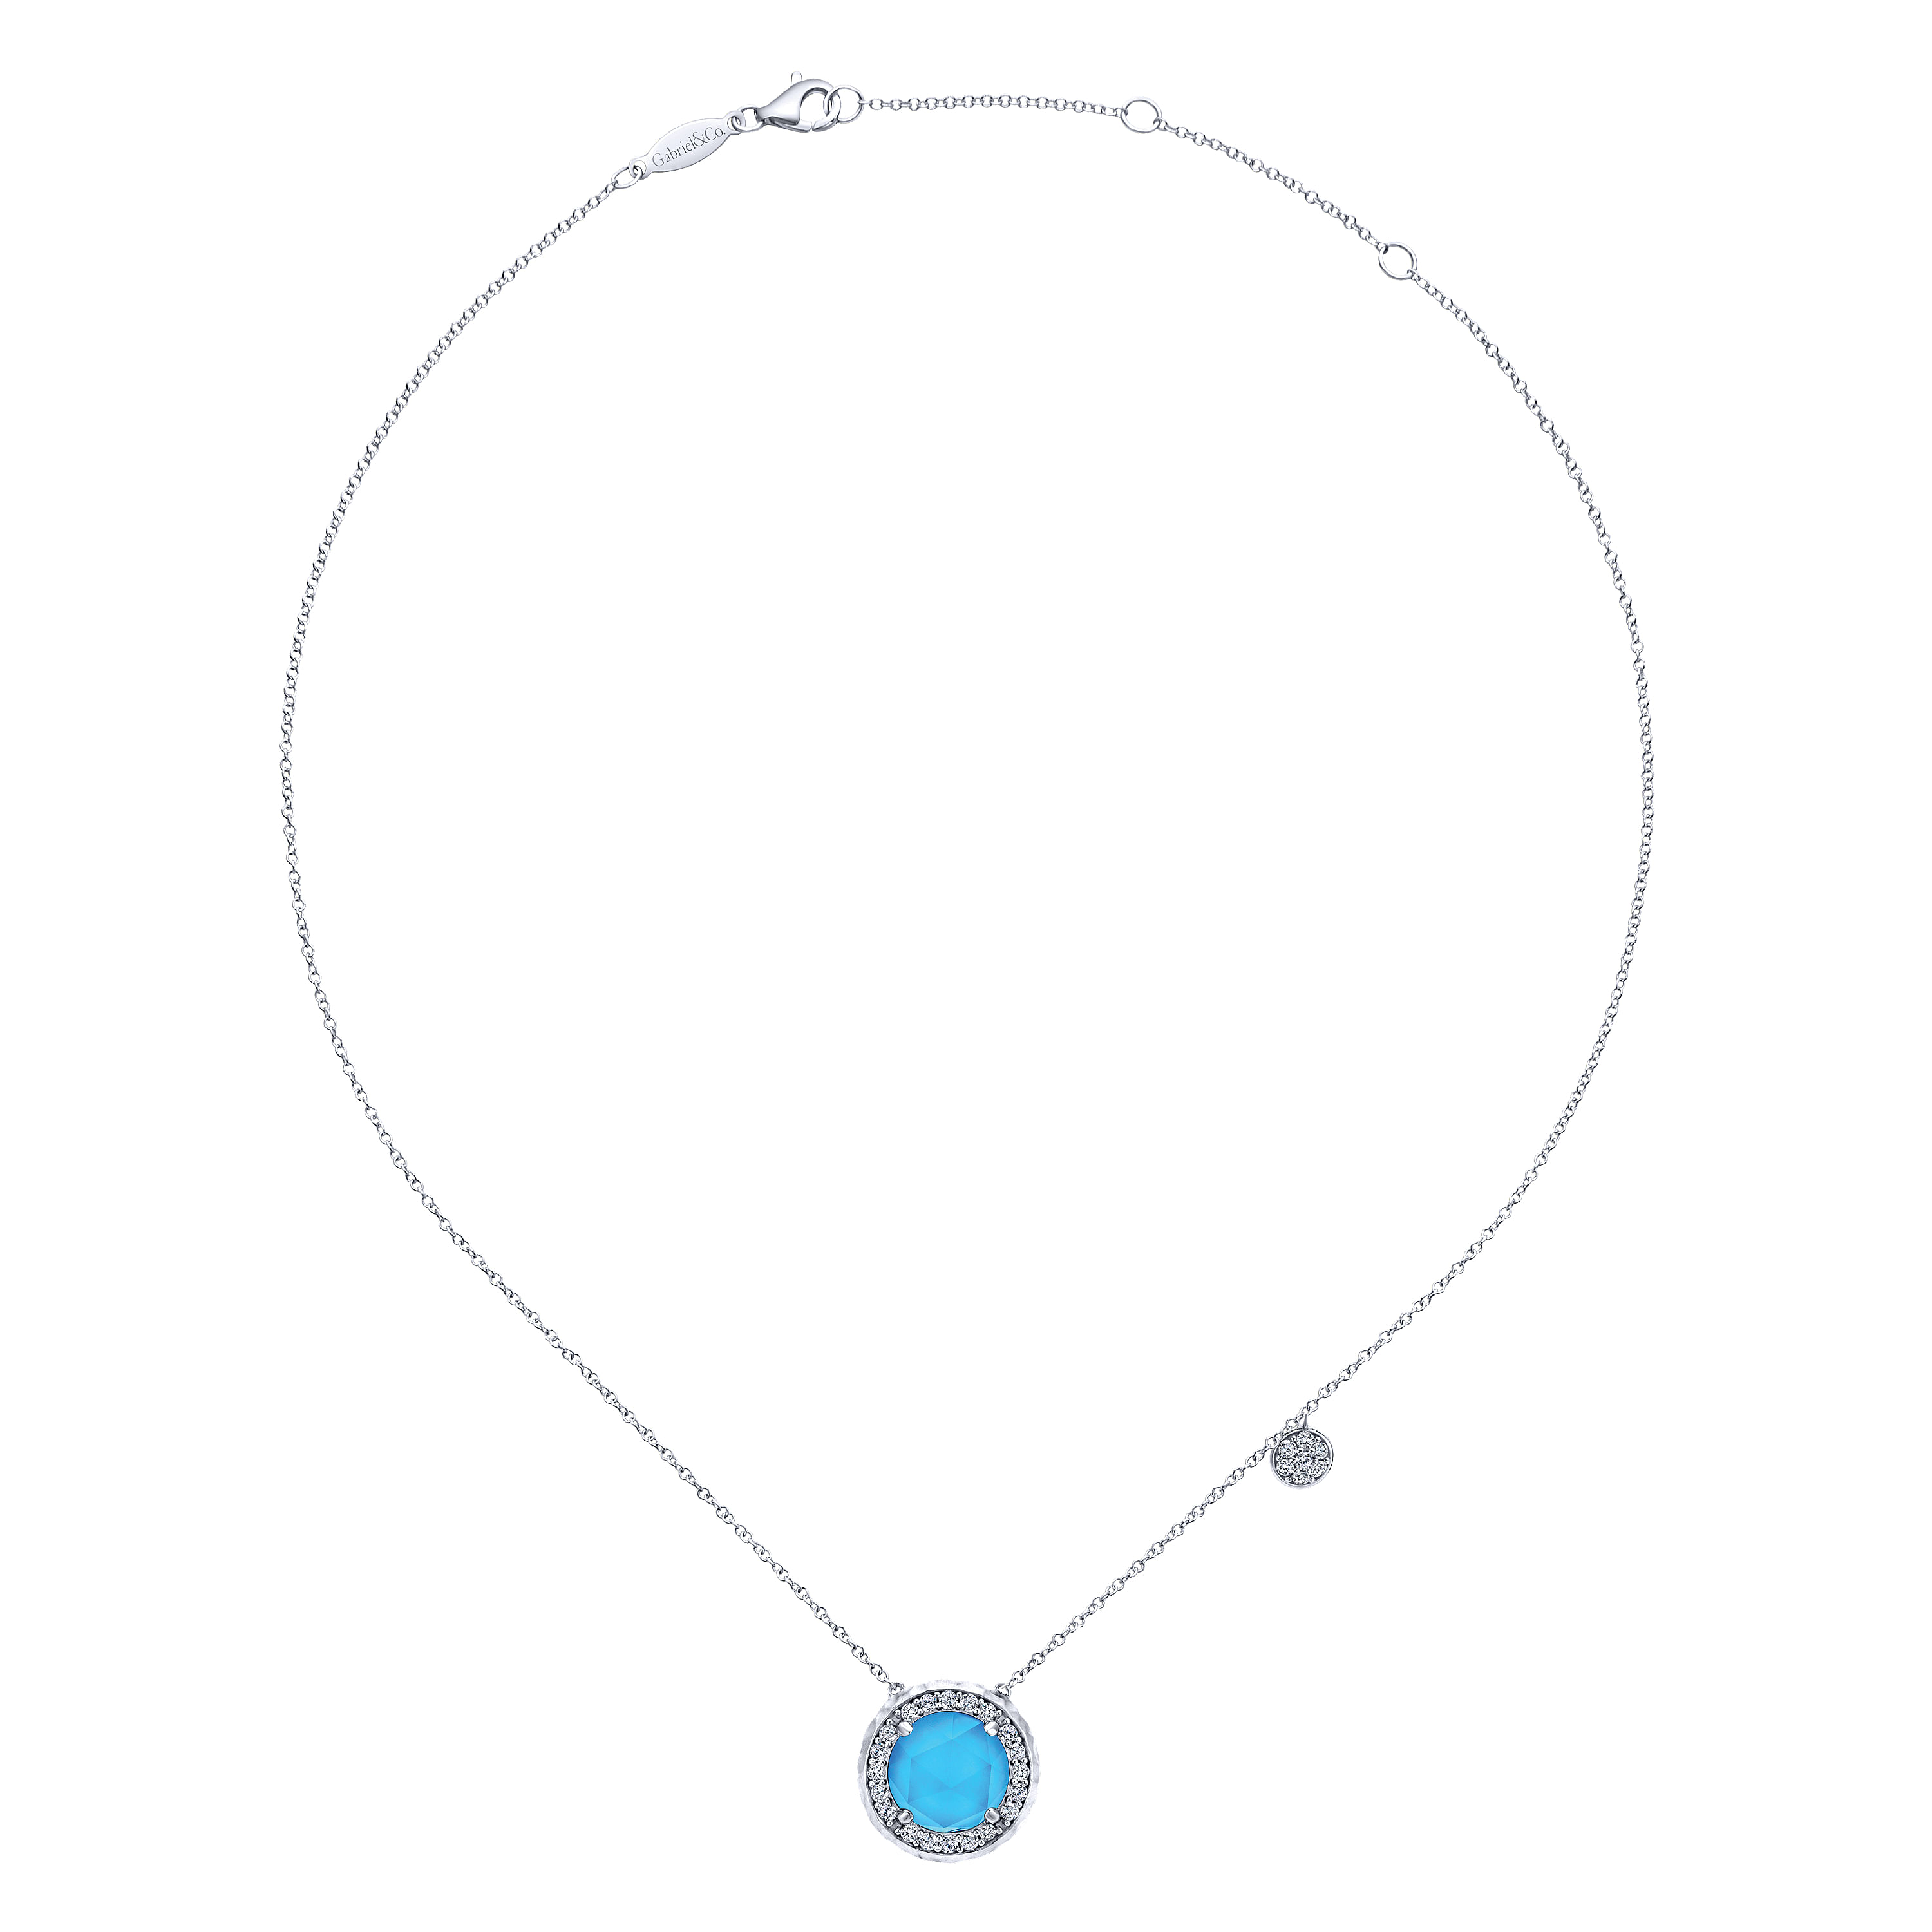 925 Sterling Silver Round Rock Crystal/Turquoise and White Sapphire Halo Pendant Necklace